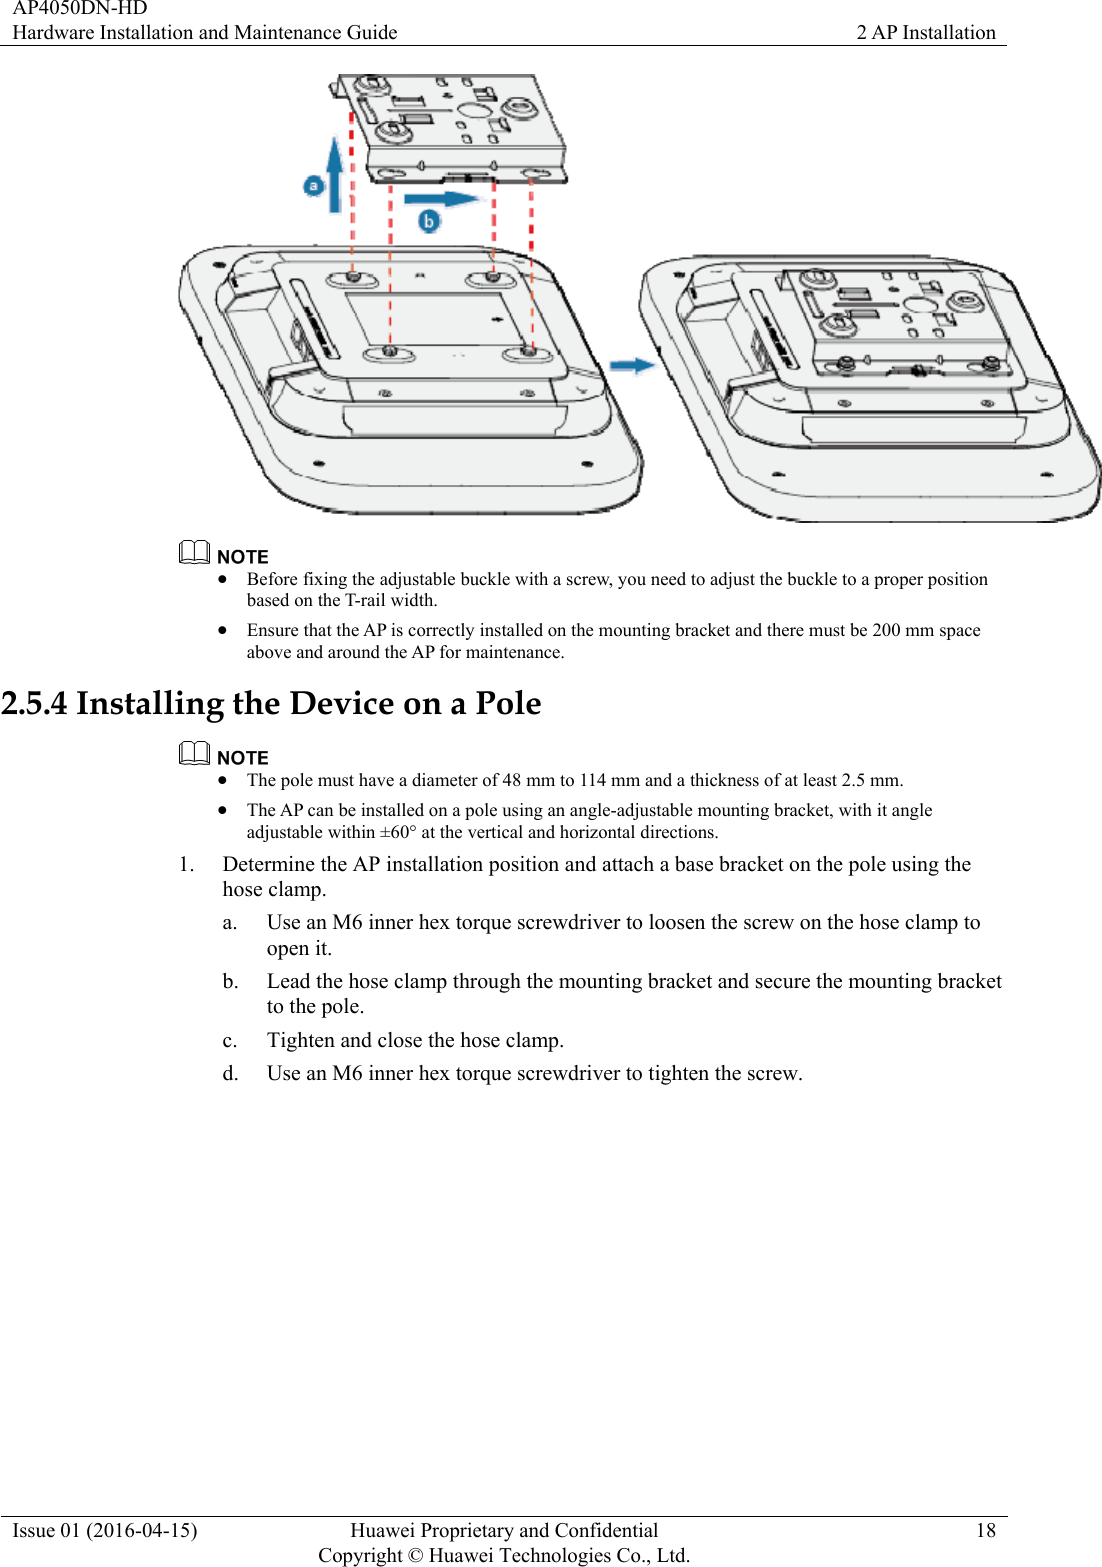 AP4050DN-HD Hardware Installation and Maintenance Guide  2 AP Installation Issue 01 (2016-04-15)  Huawei Proprietary and Confidential         Copyright © Huawei Technologies Co., Ltd.18    Before fixing the adjustable buckle with a screw, you need to adjust the buckle to a proper position based on the T-rail width.  Ensure that the AP is correctly installed on the mounting bracket and there must be 200 mm space above and around the AP for maintenance. 2.5.4 Installing the Device on a Pole   The pole must have a diameter of 48 mm to 114 mm and a thickness of at least 2.5 mm.  The AP can be installed on a pole using an angle-adjustable mounting bracket, with it angle adjustable within ±60° at the vertical and horizontal directions. 1. Determine the AP installation position and attach a base bracket on the pole using the hose clamp. a. Use an M6 inner hex torque screwdriver to loosen the screw on the hose clamp to open it. b. Lead the hose clamp through the mounting bracket and secure the mounting bracket to the pole. c. Tighten and close the hose clamp. d. Use an M6 inner hex torque screwdriver to tighten the screw. 